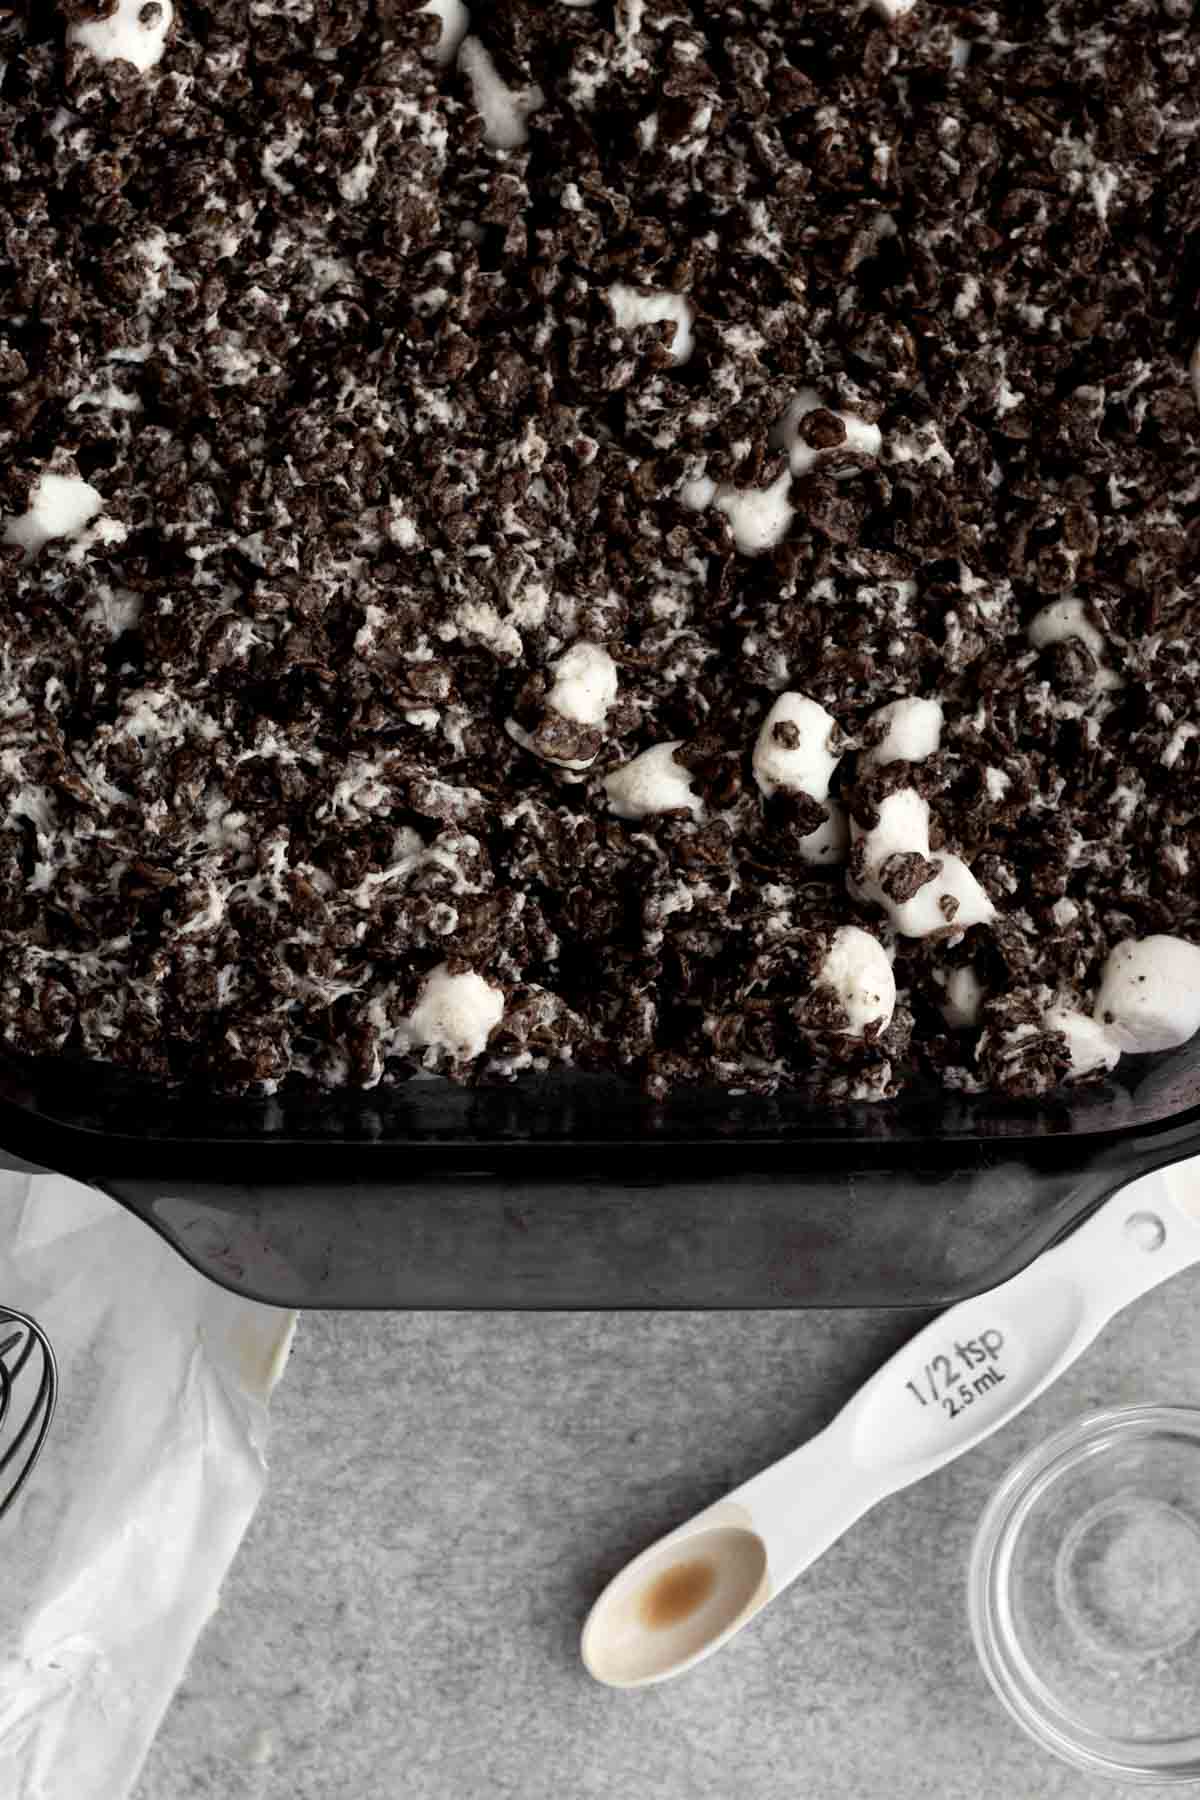 Filling a baking dish with the mix.